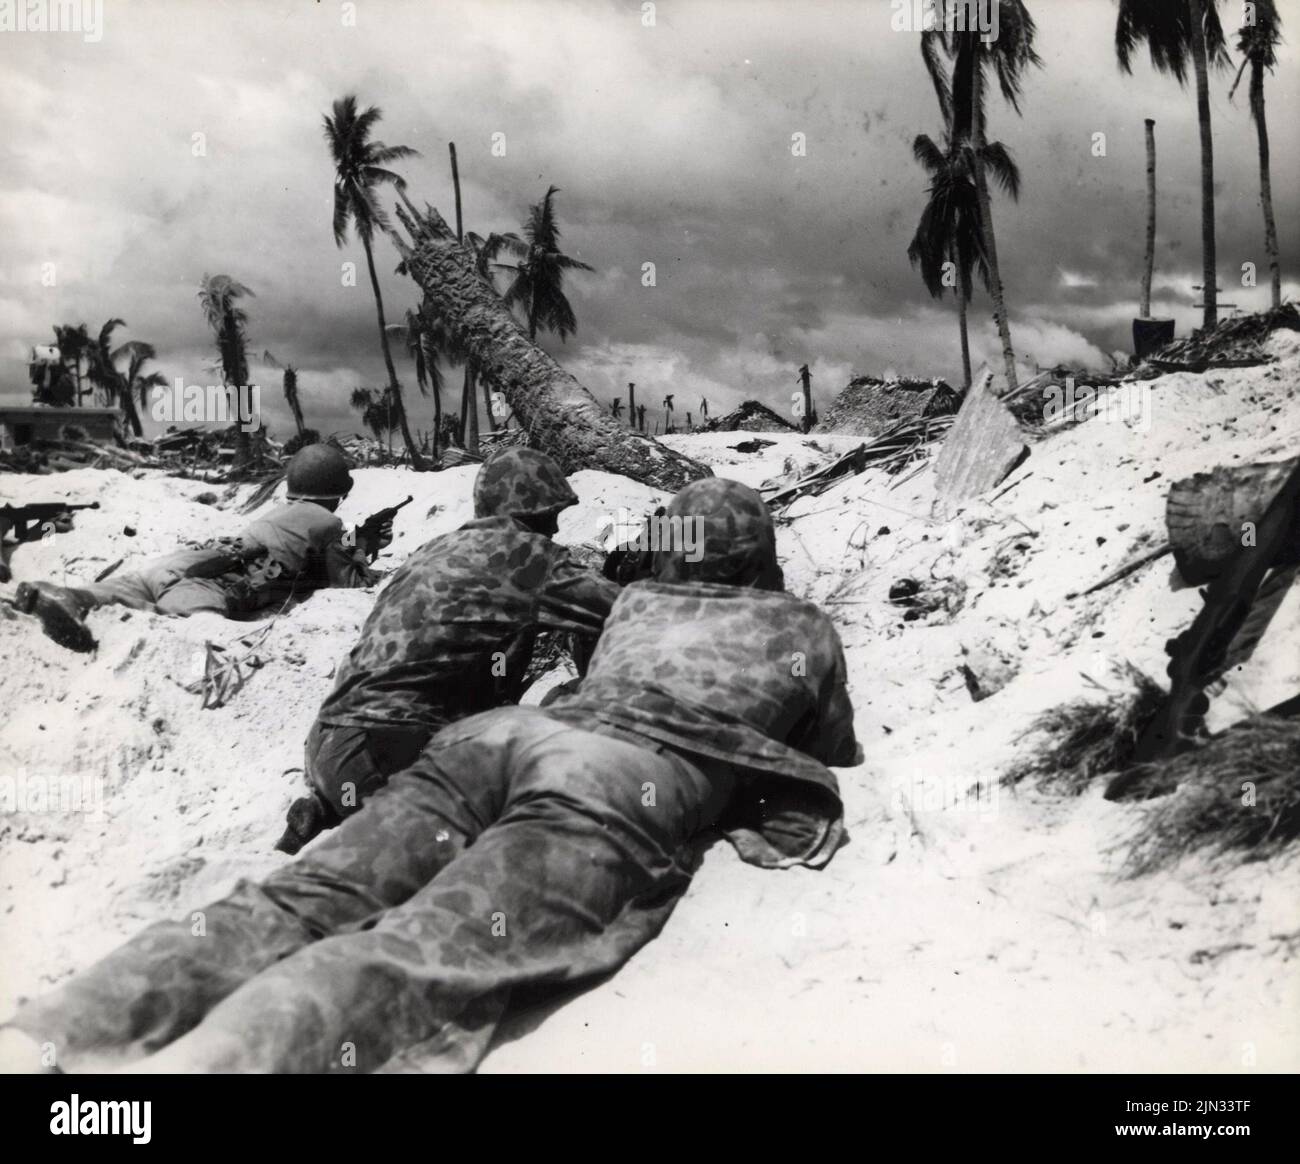 WWII PHOTO 8X10 US MARINES 25TH MARINES BATTLE ACTION DESTRUCTION PACIFIC ISLAND 